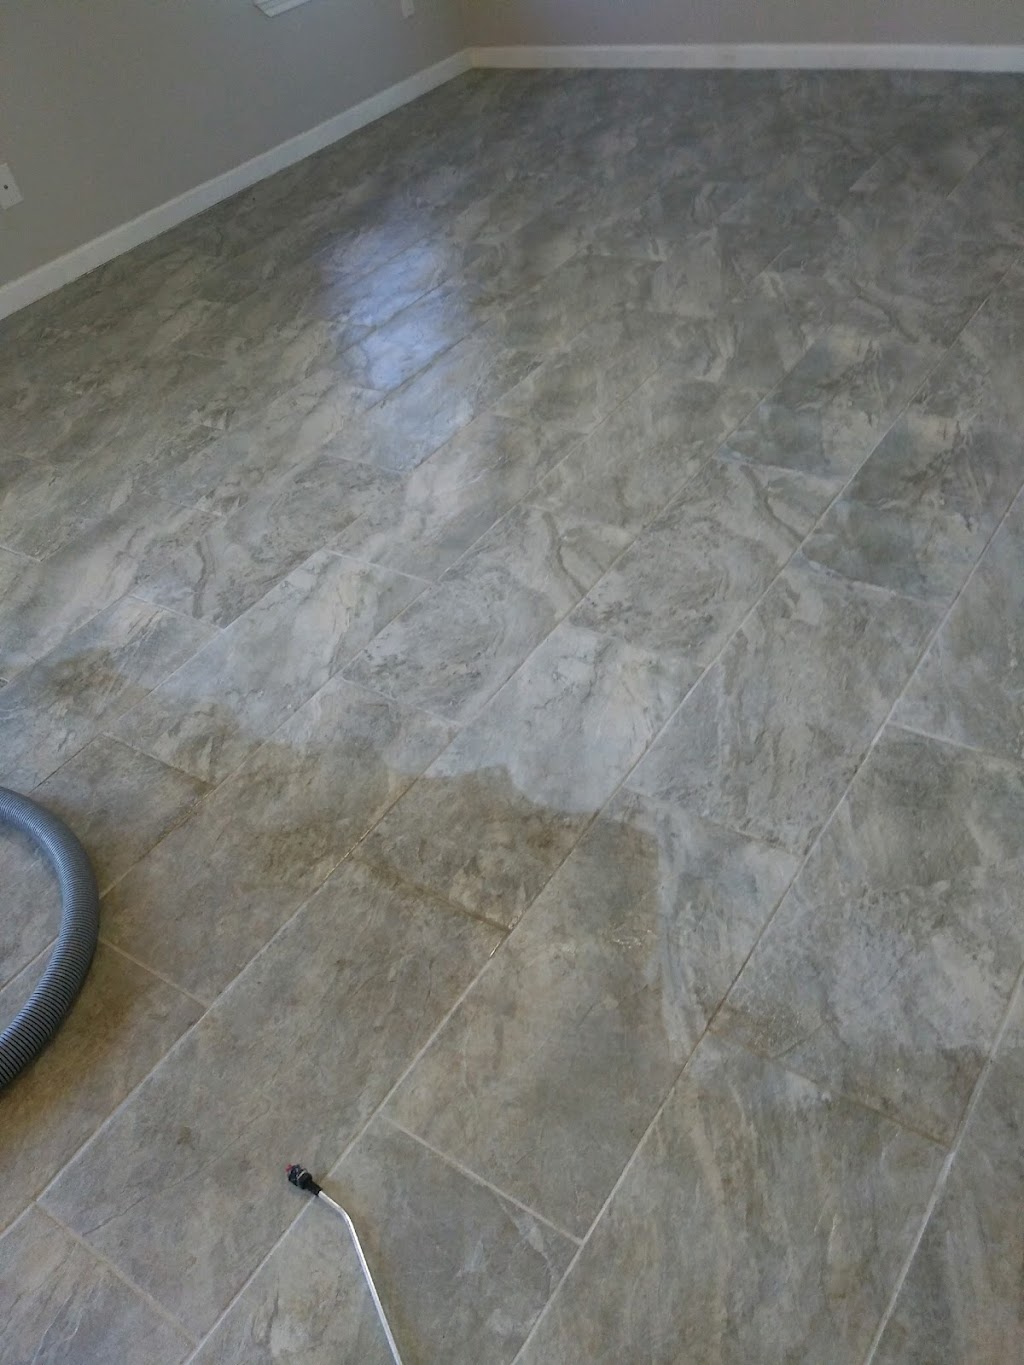 Cinco Ranch Tile and Carpet Cleaning | 27021 Cinco Ranch Blvd, Katy, TX 77494 | Phone: (281) 896-0271